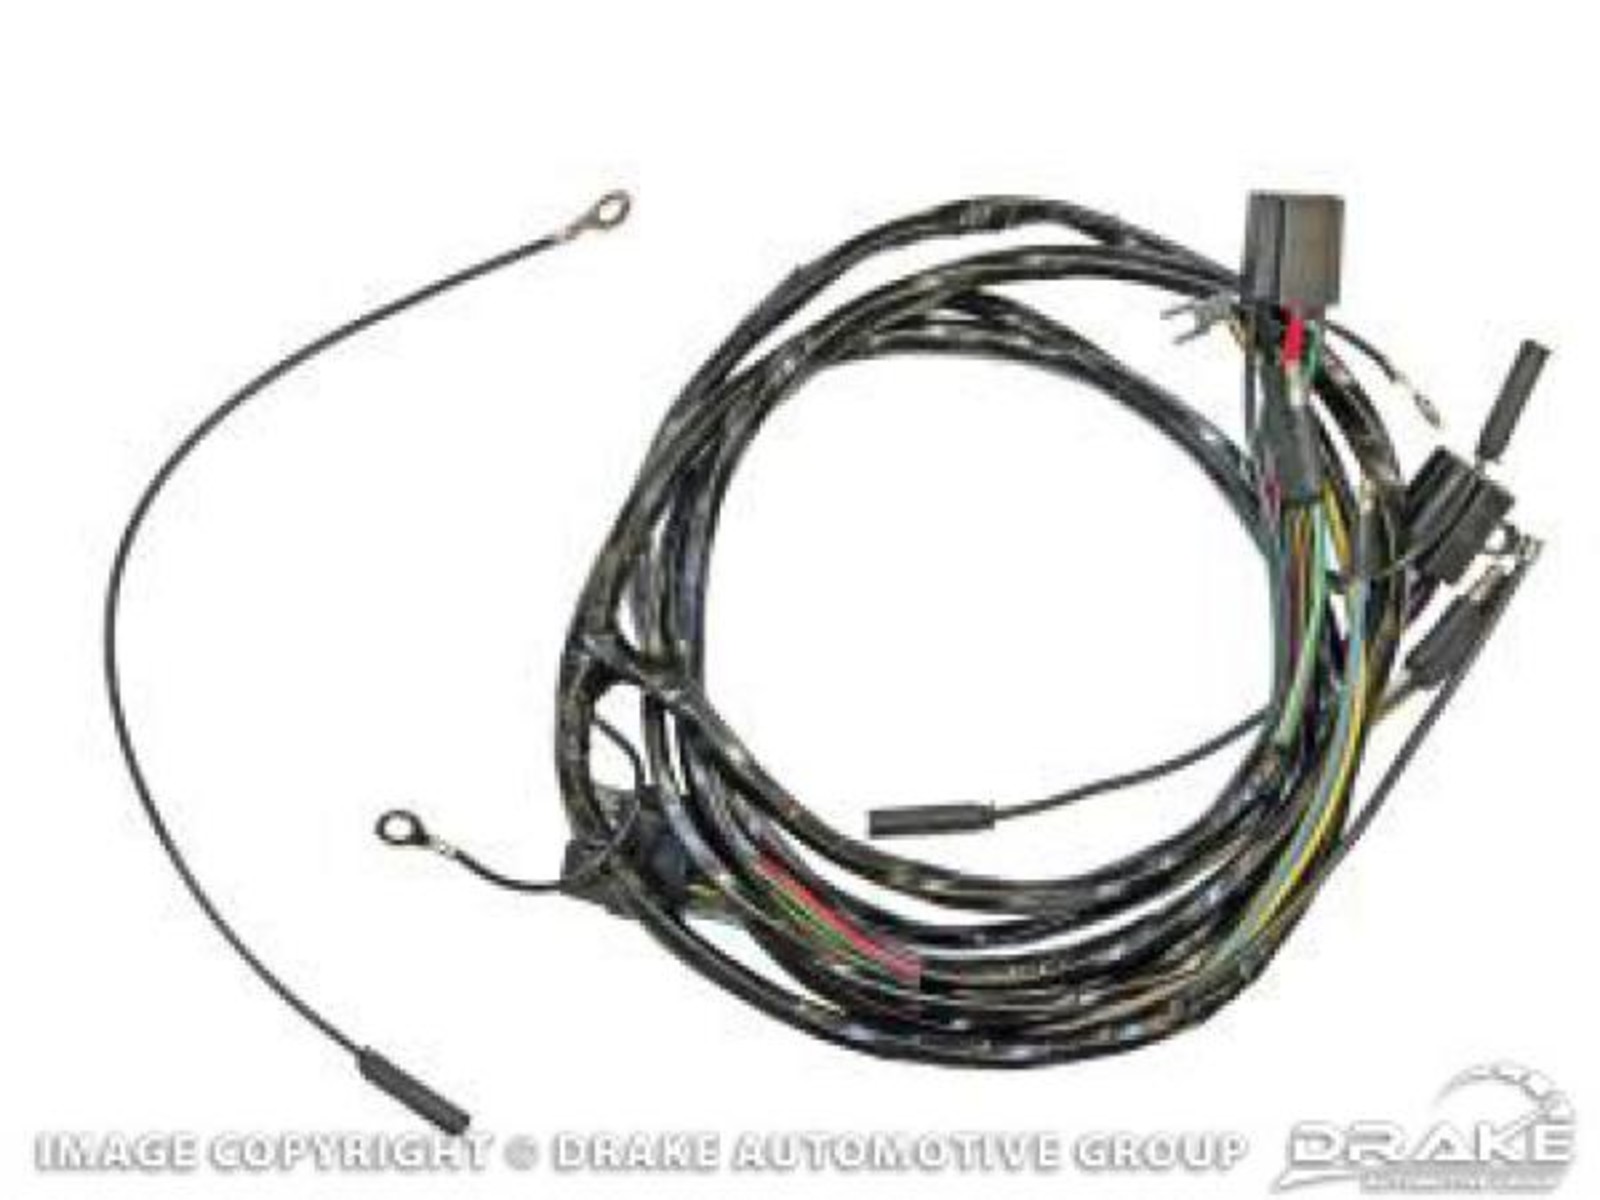 Mustang Spare Parts: 64 Headlight Wiring Harness